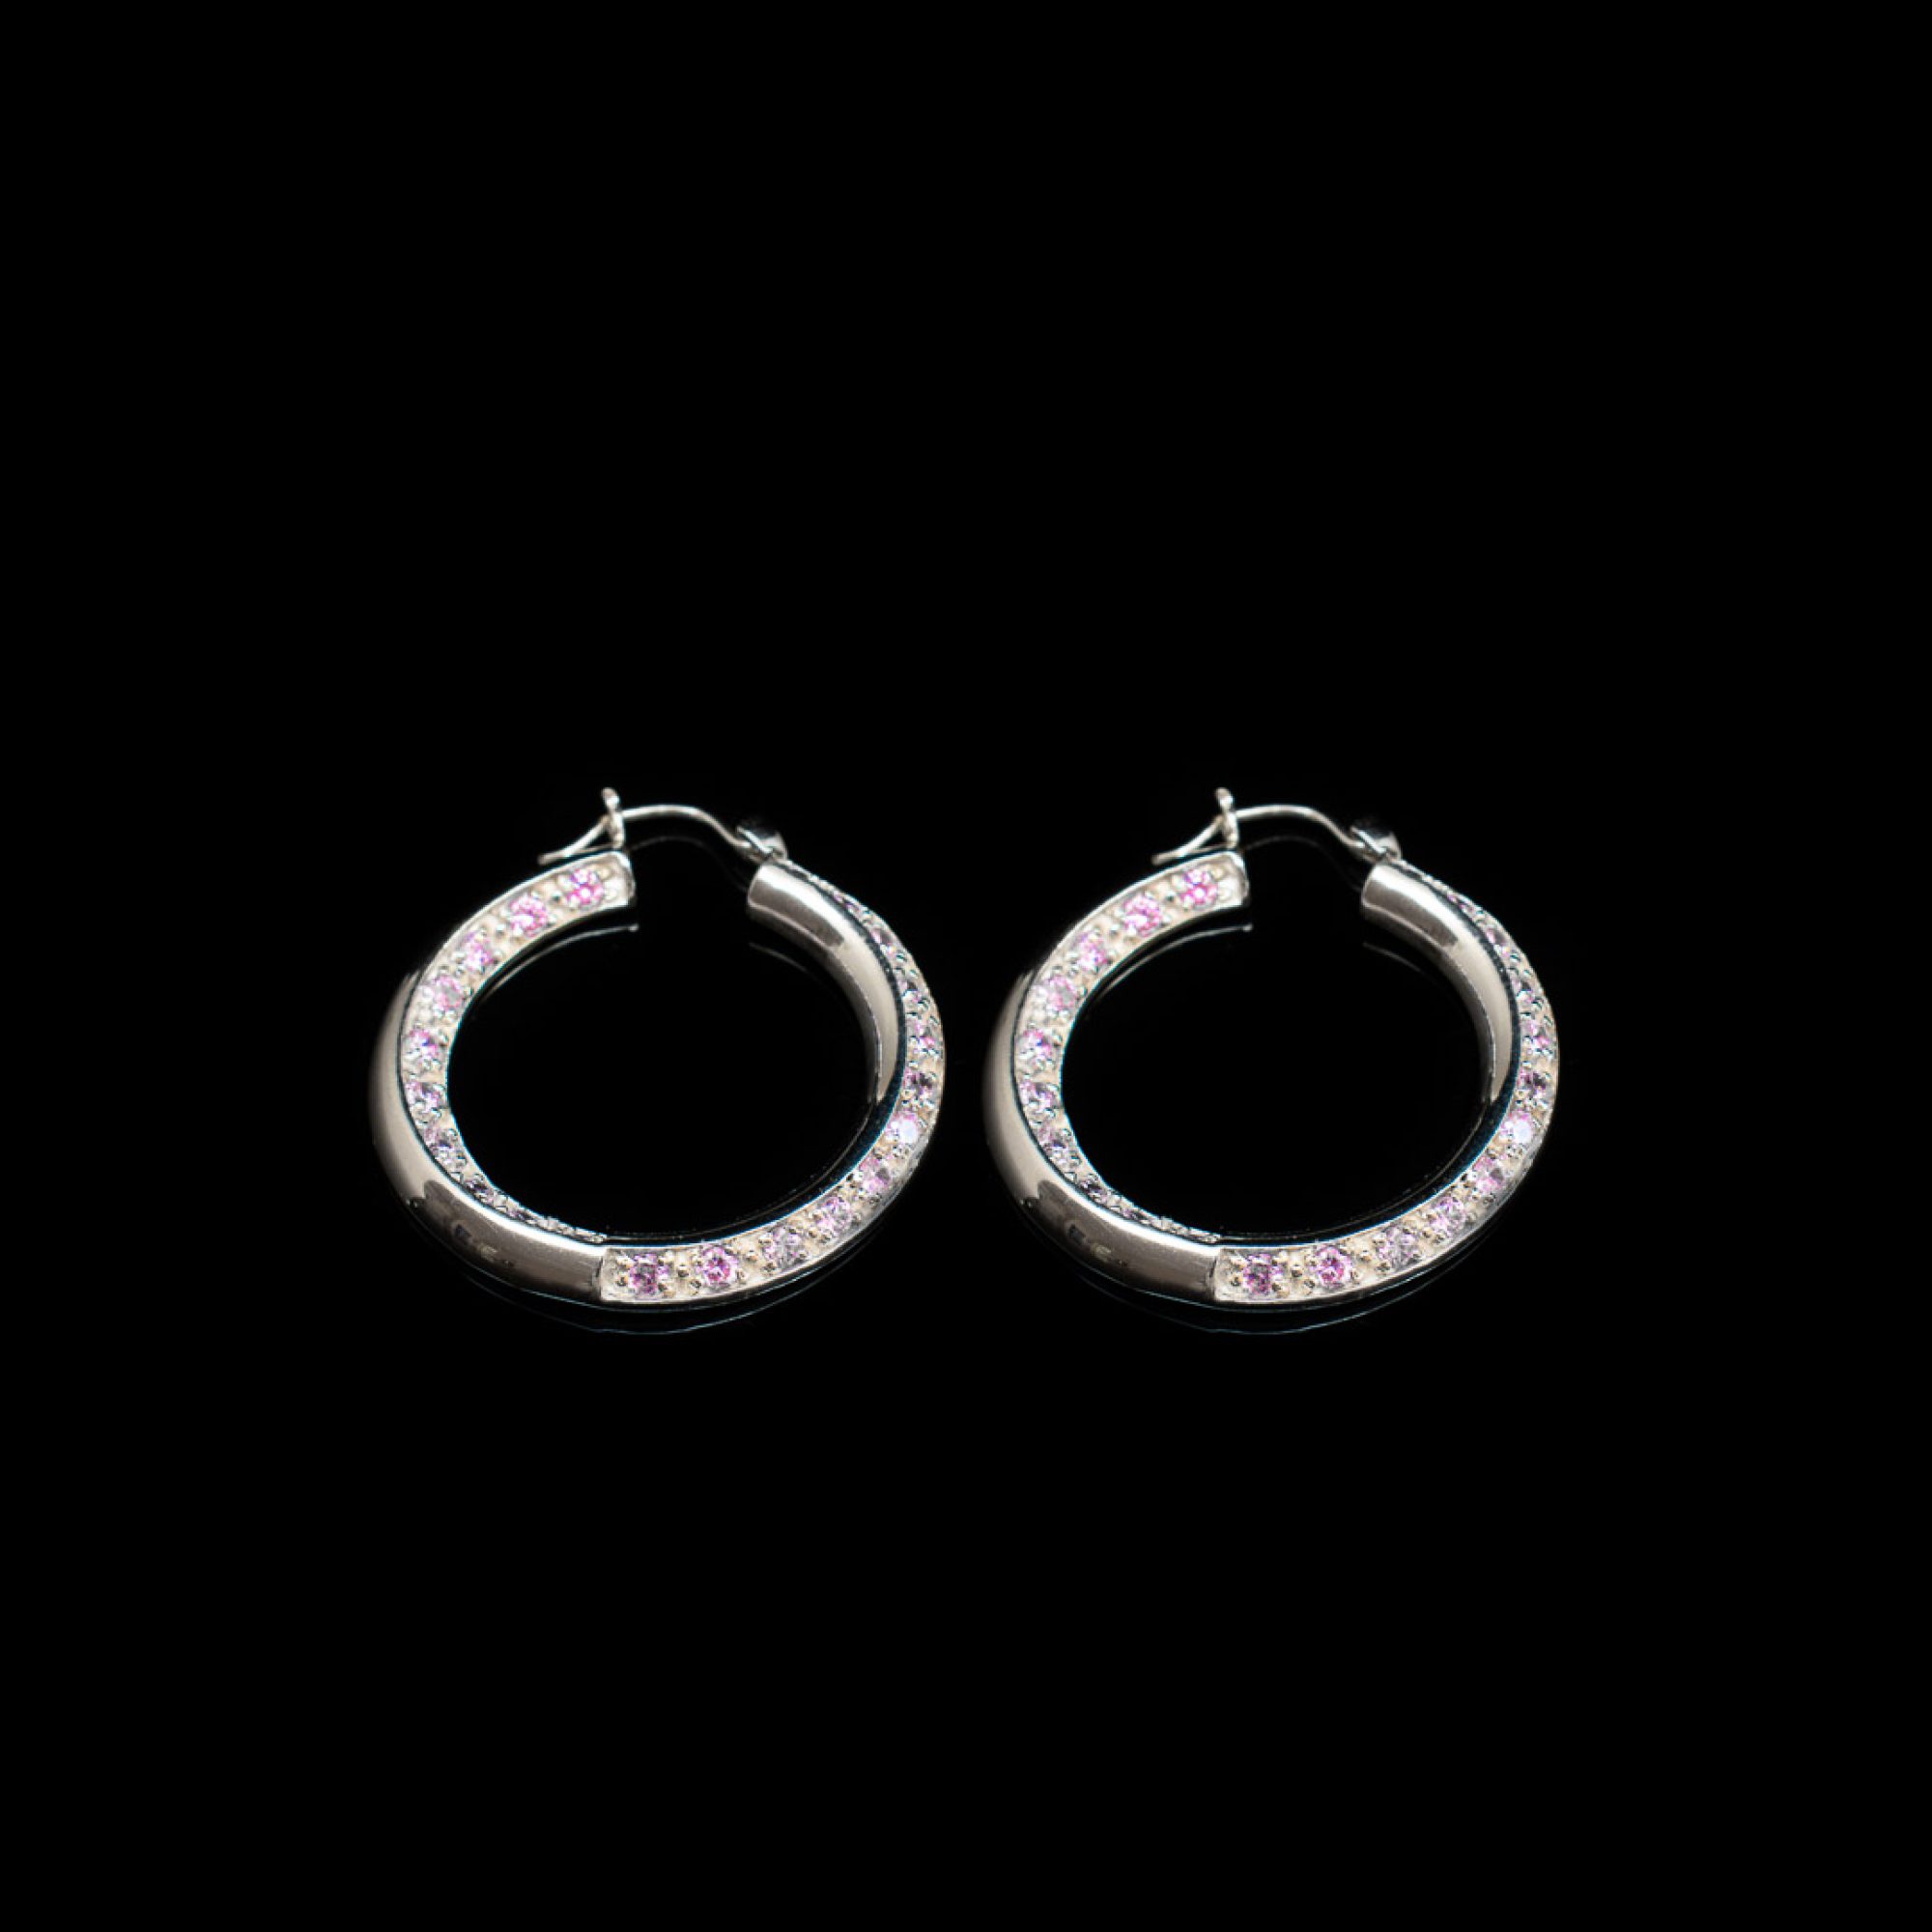 Silver hoops with pink quartz stones